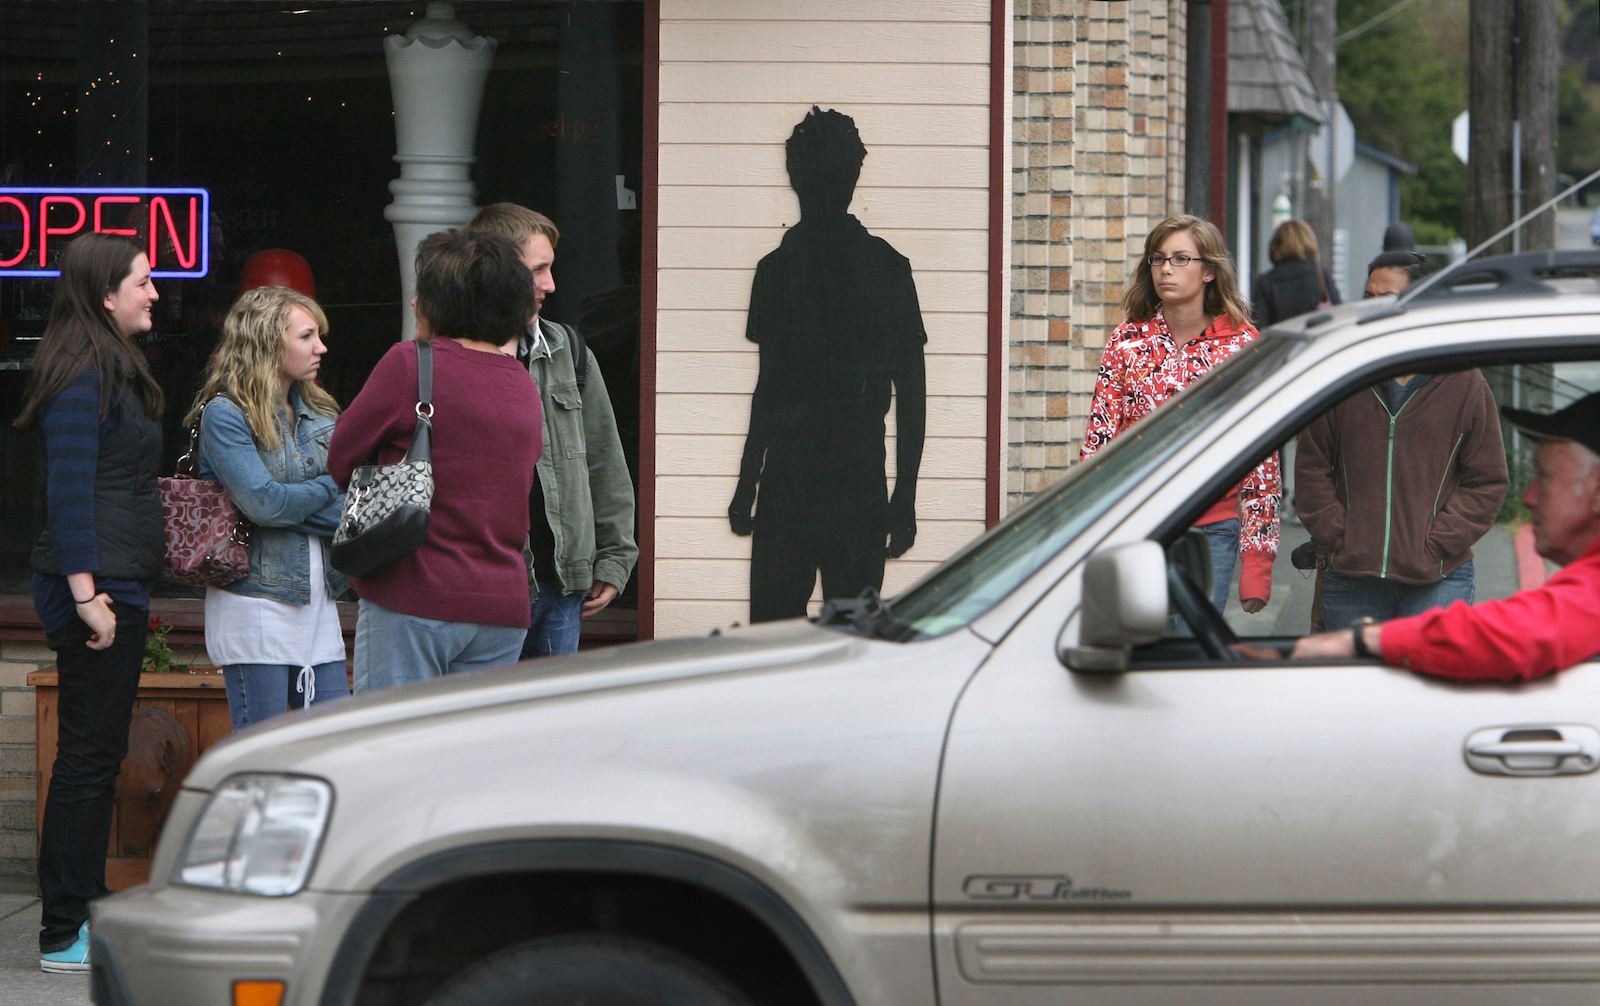 a cut-out of "Edward," the vampire protagonist from Twilight, pasted onto the side of a building while groups of normal people stand by